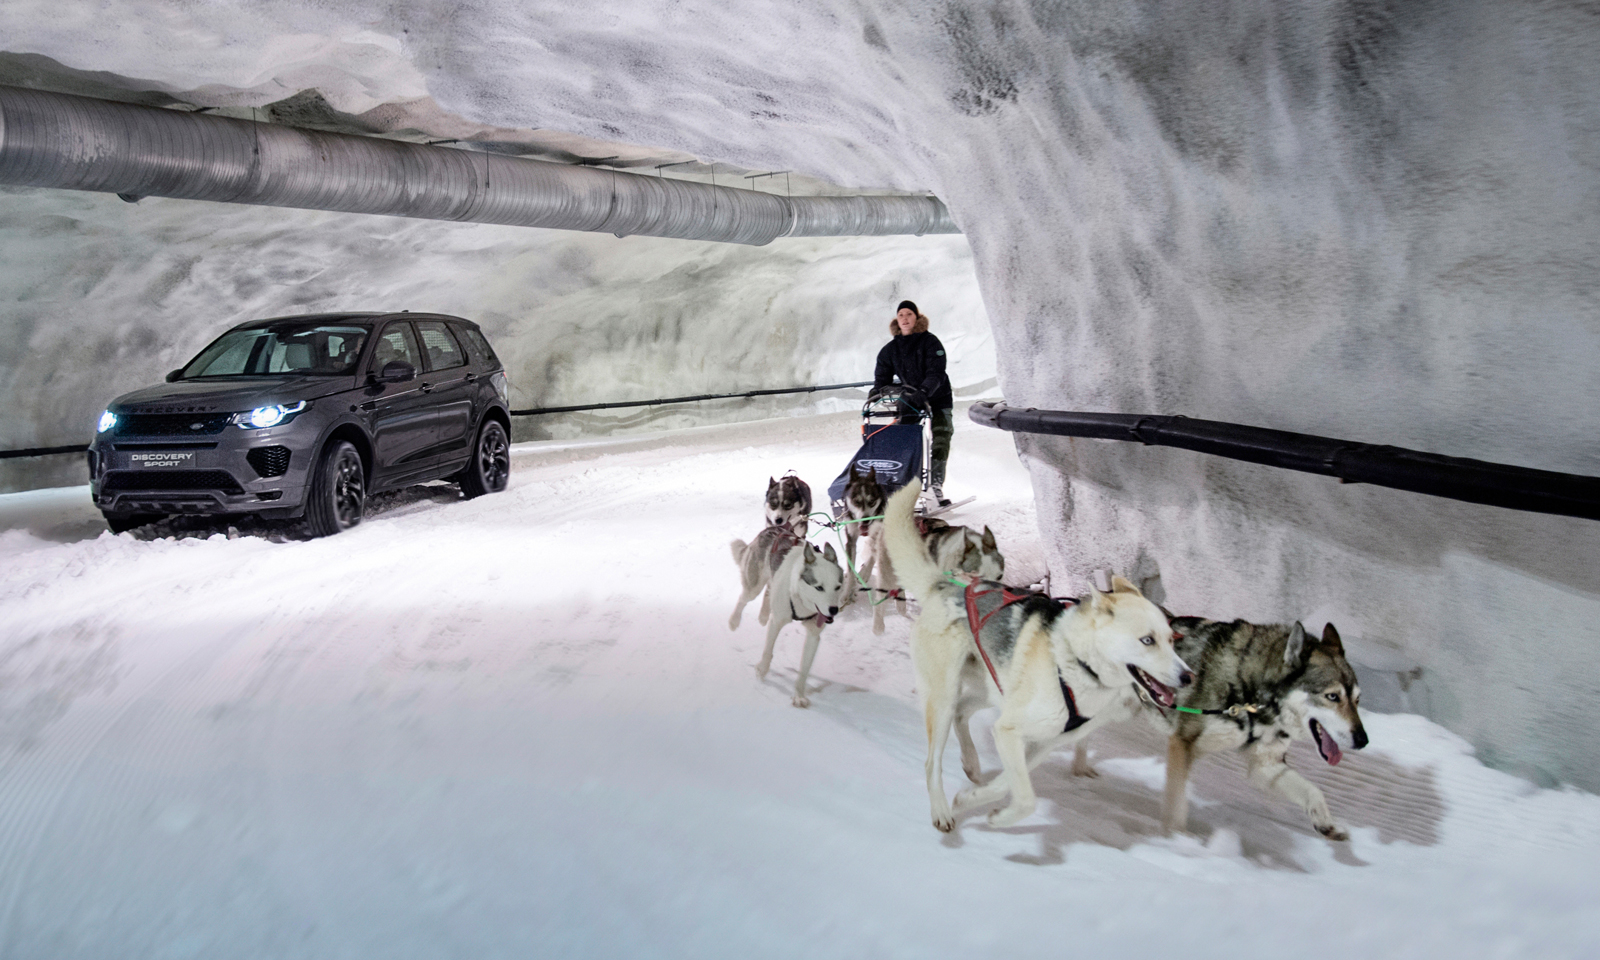 •Discovery Sport takes on dog sled team in unique race at Vesileppis Ski Tunnel in Finland